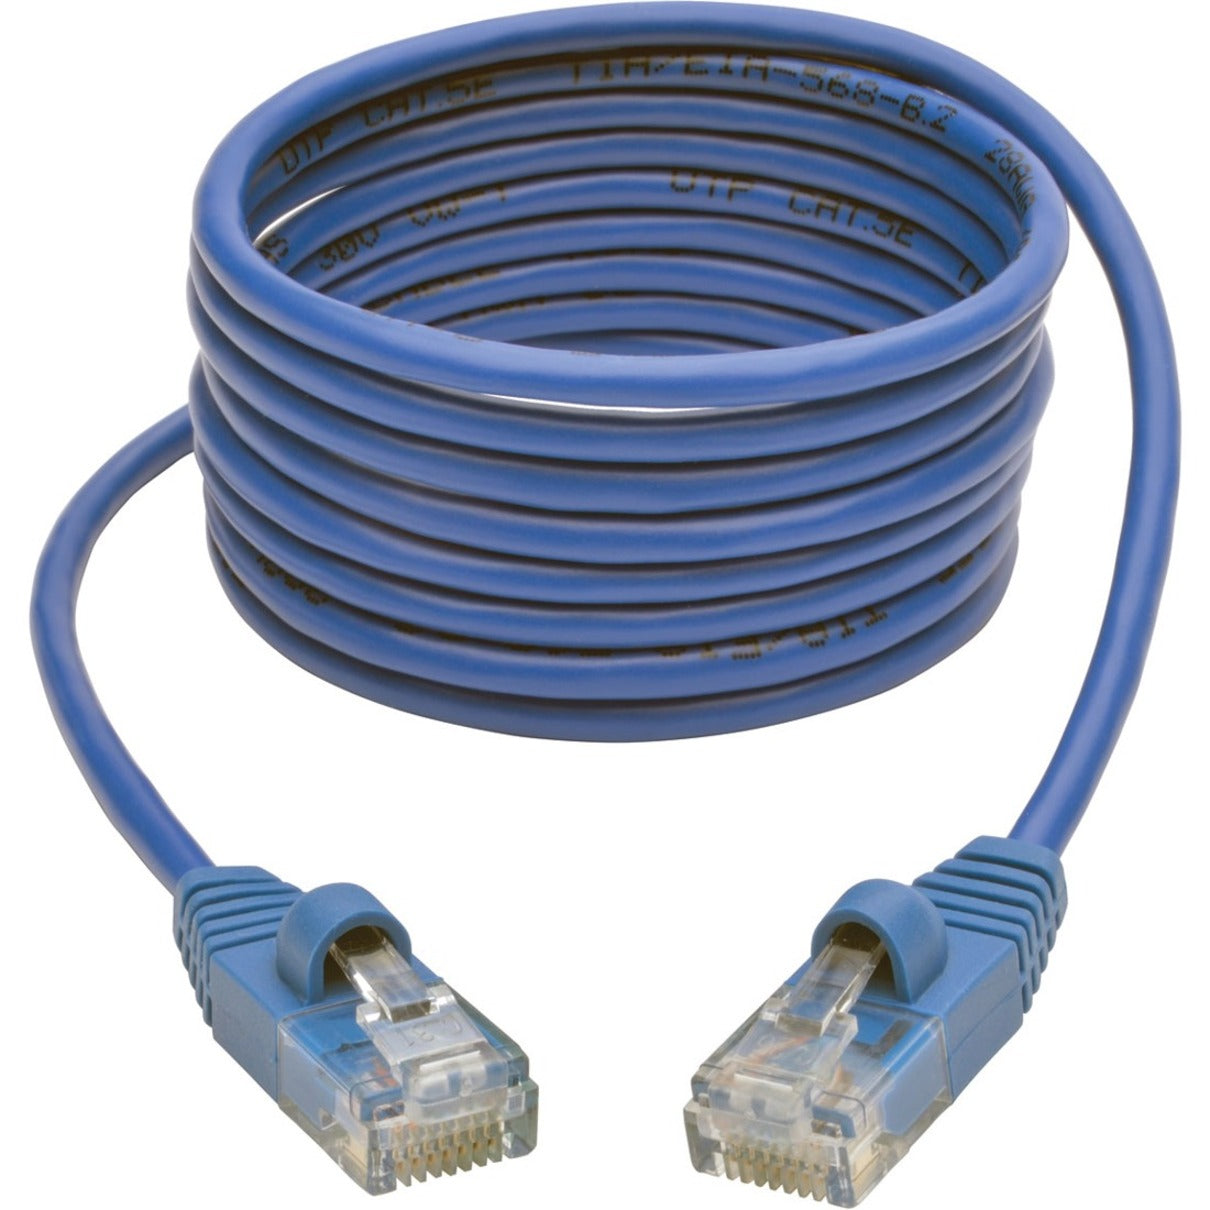 Tripp Lite N001-S06-BL Cat5e 350 MHz Snagless Molded Slim UTP Patch Cable, Blue, 6ft